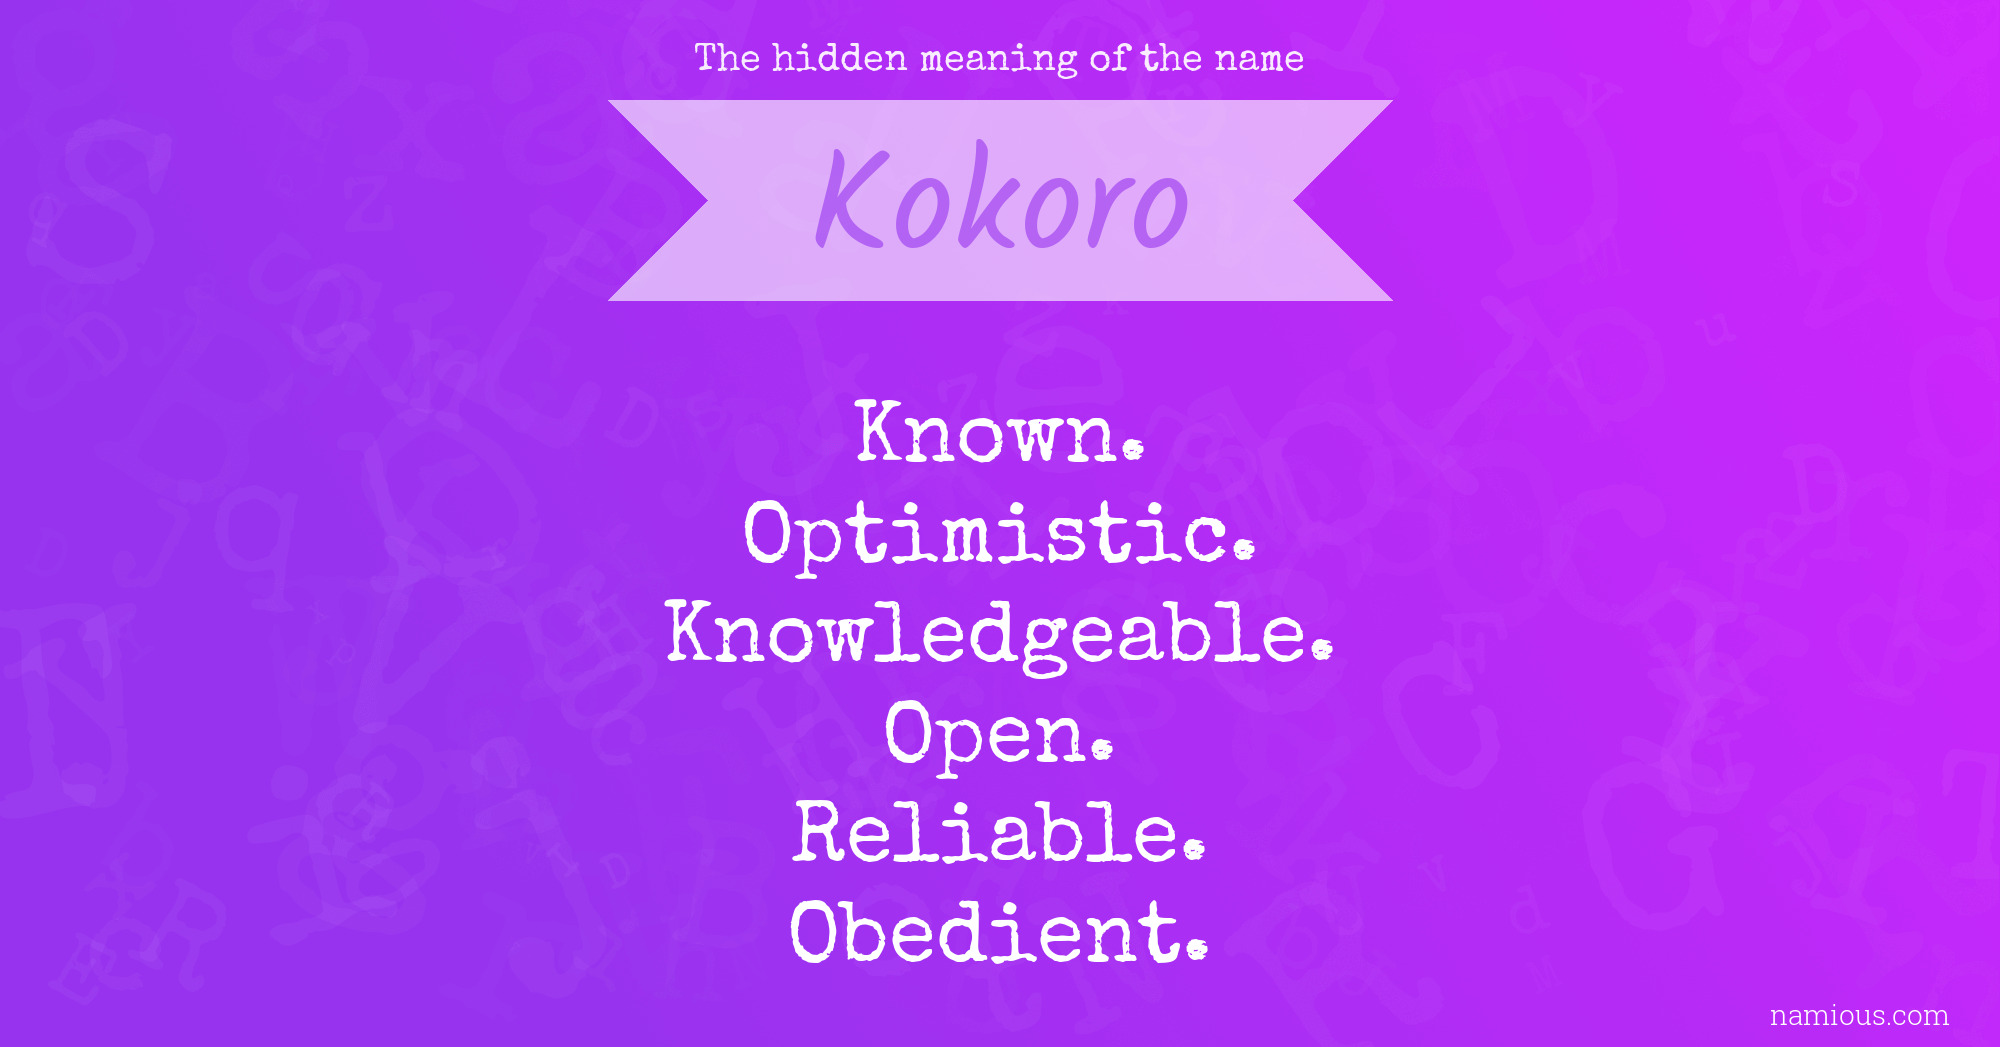 The hidden meaning of the name Kokoro